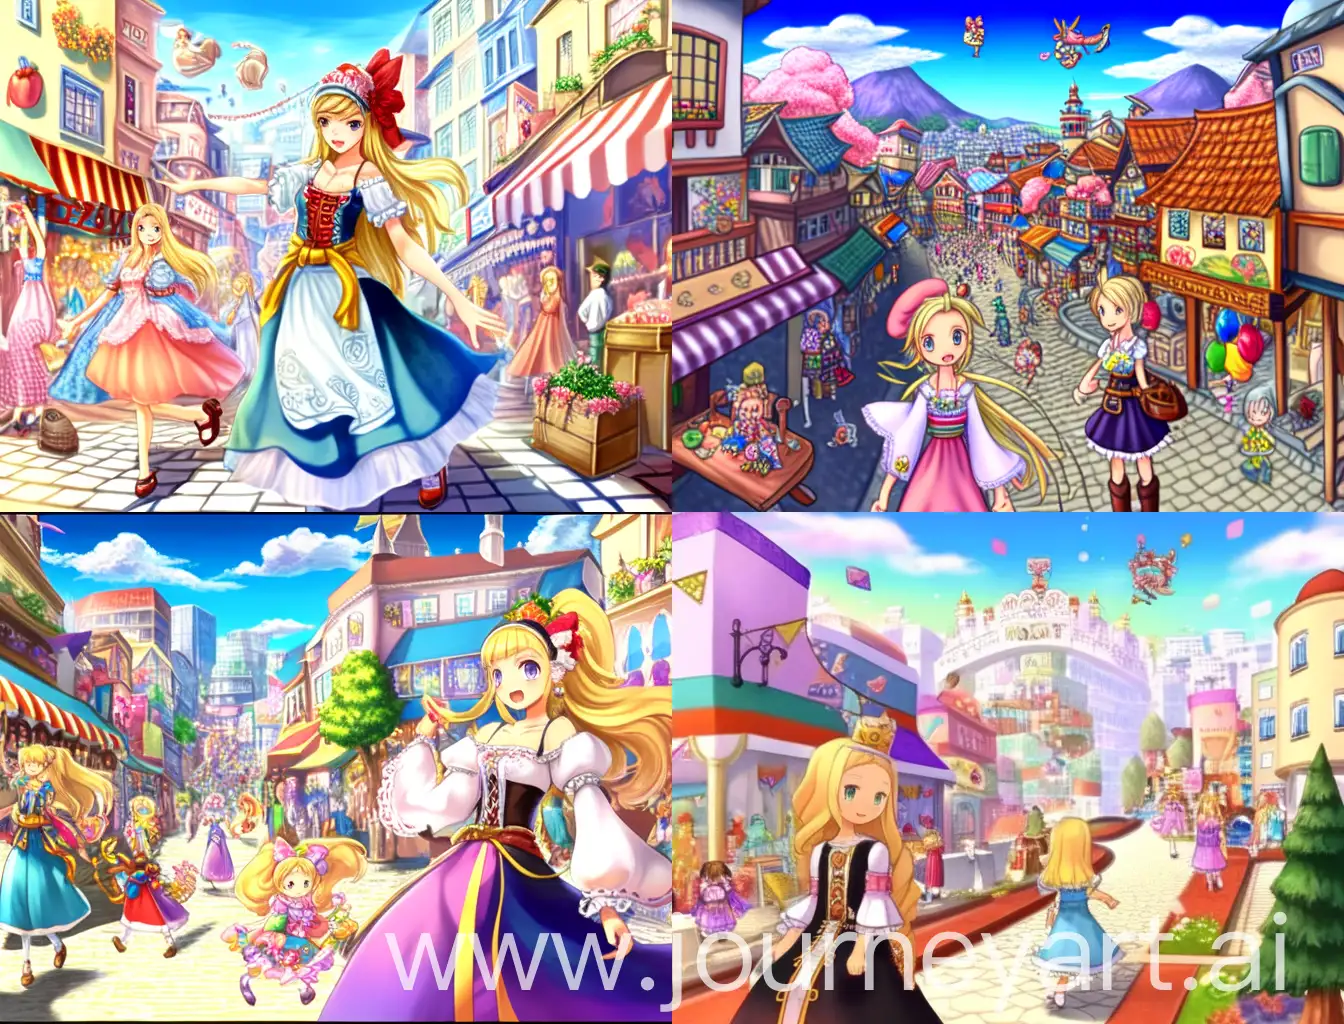 Colorful-Medieval-Fantasy-Town-Street-Scene-with-Shopping-and-Festive-Decorations